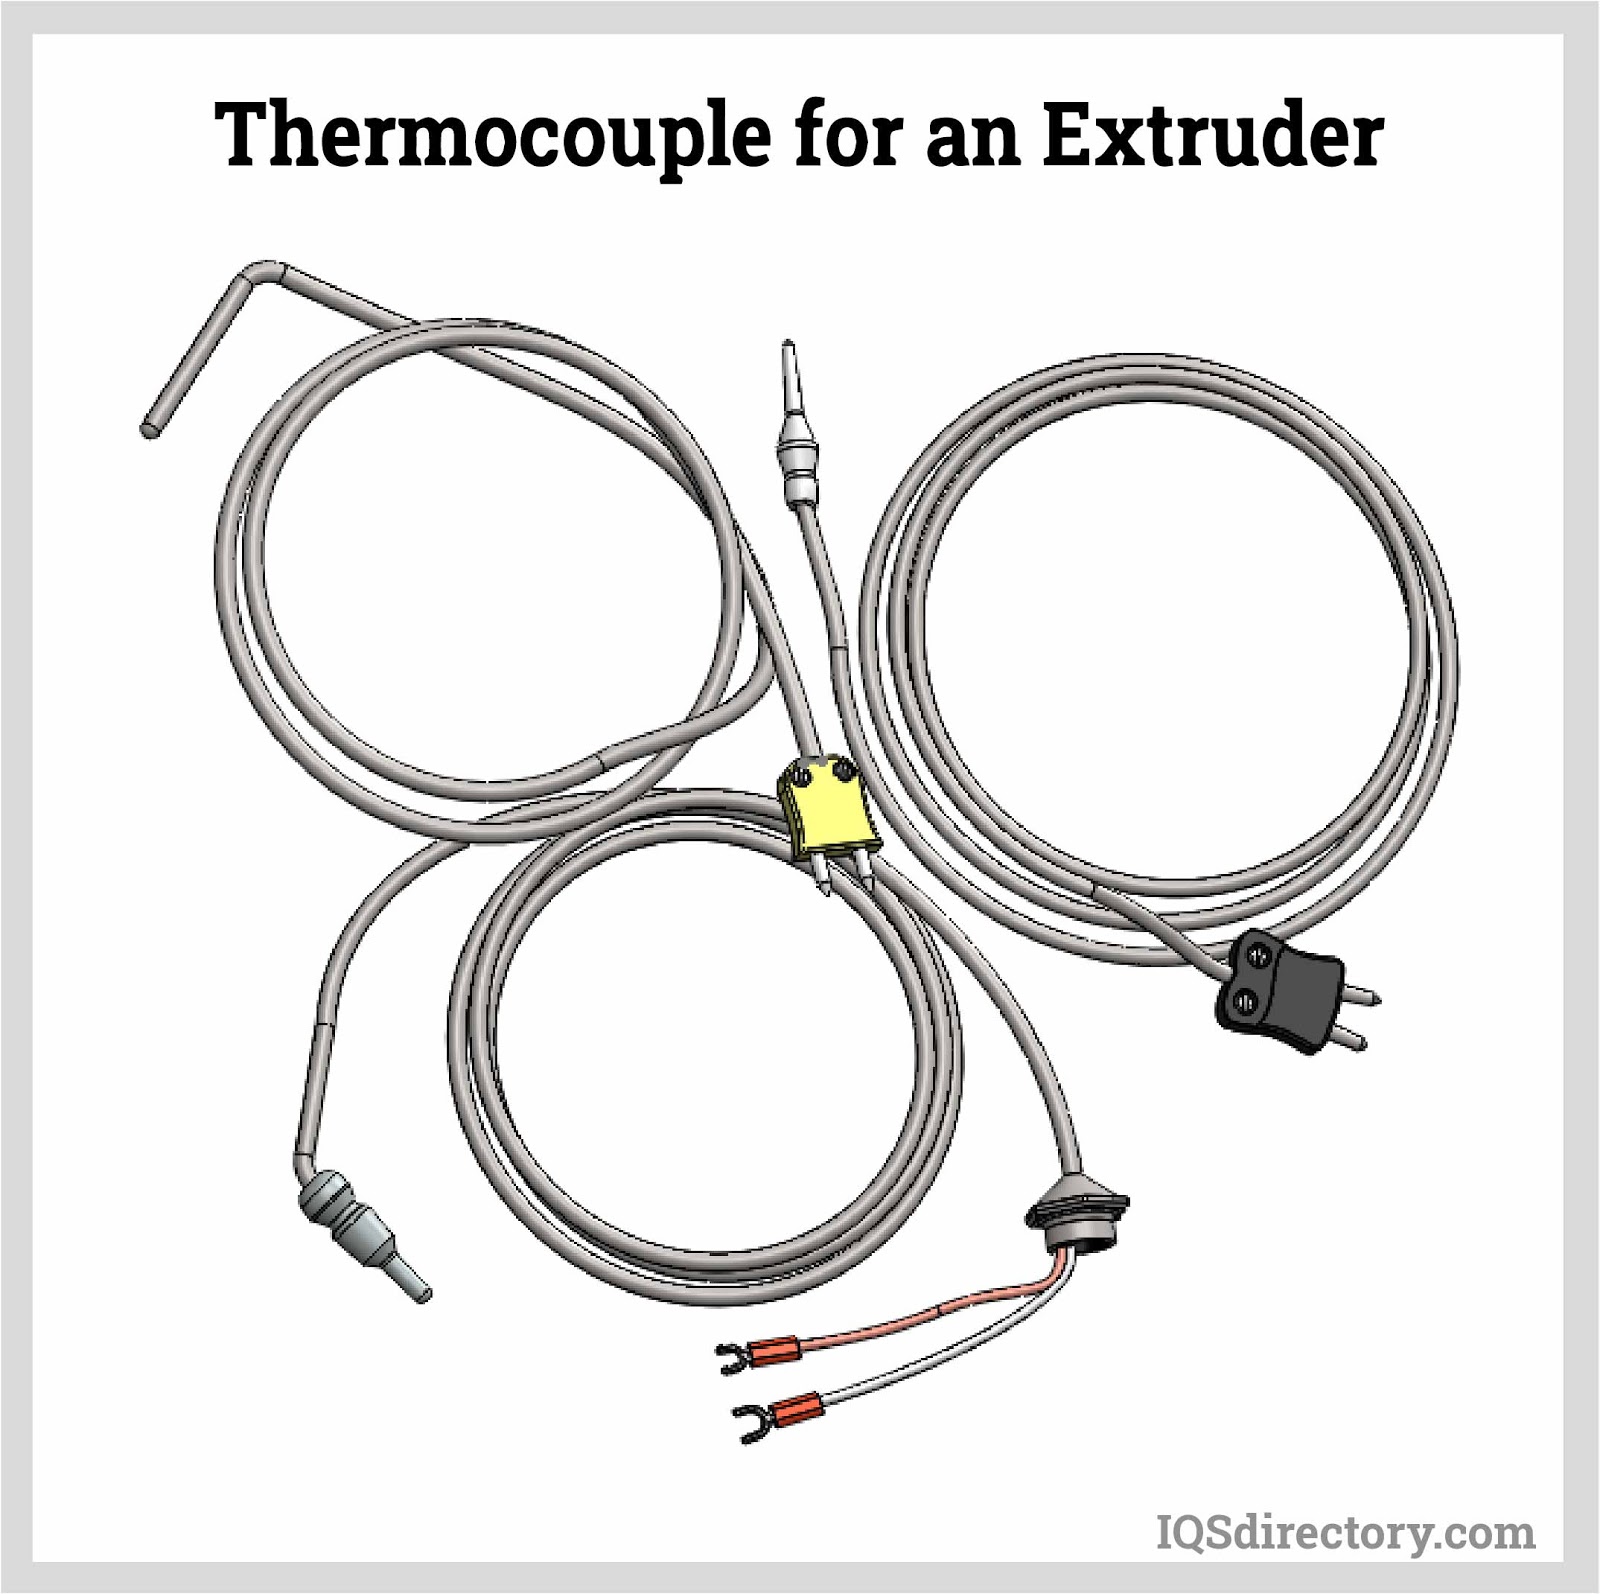 Thermocouple for an Extruder